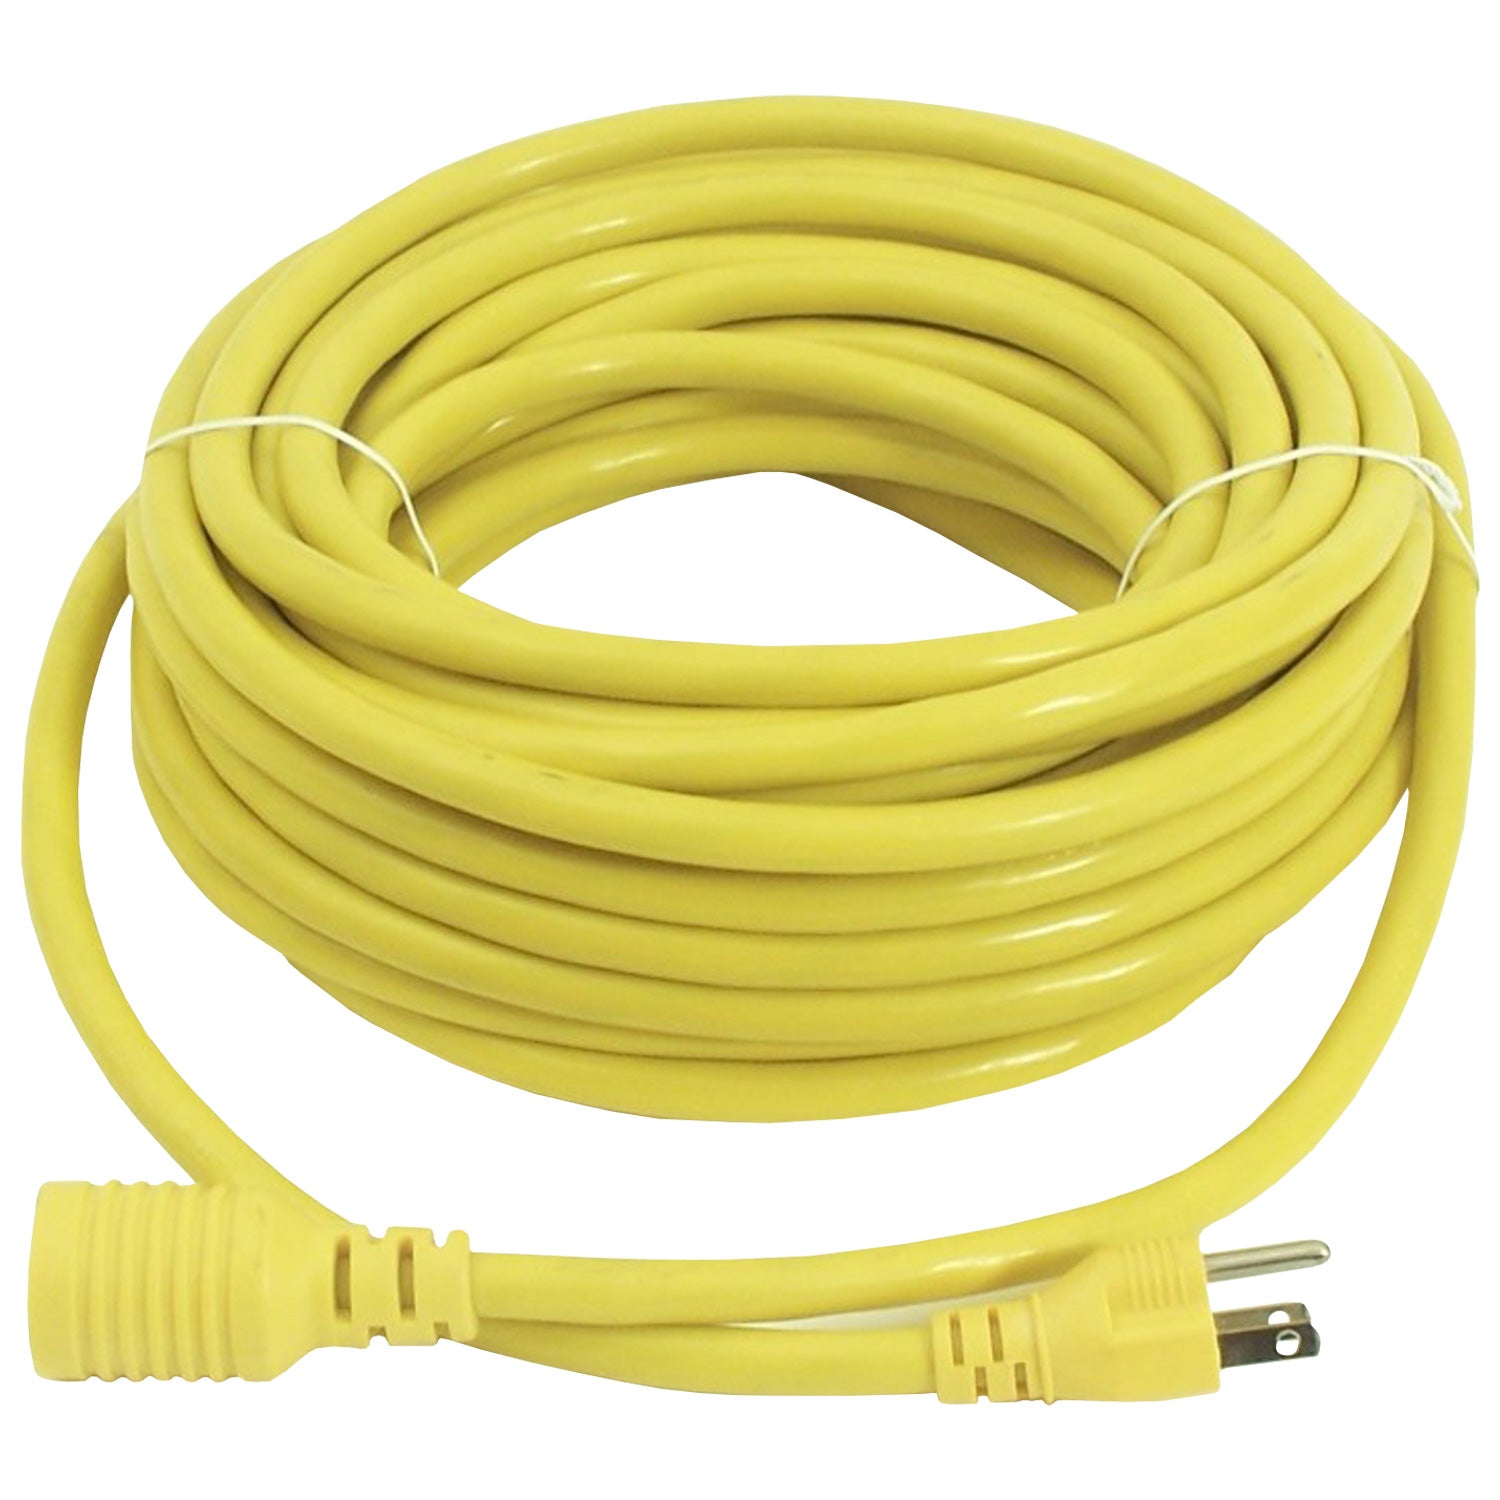 50-foot-power-cord-extention-for-edic-extractor